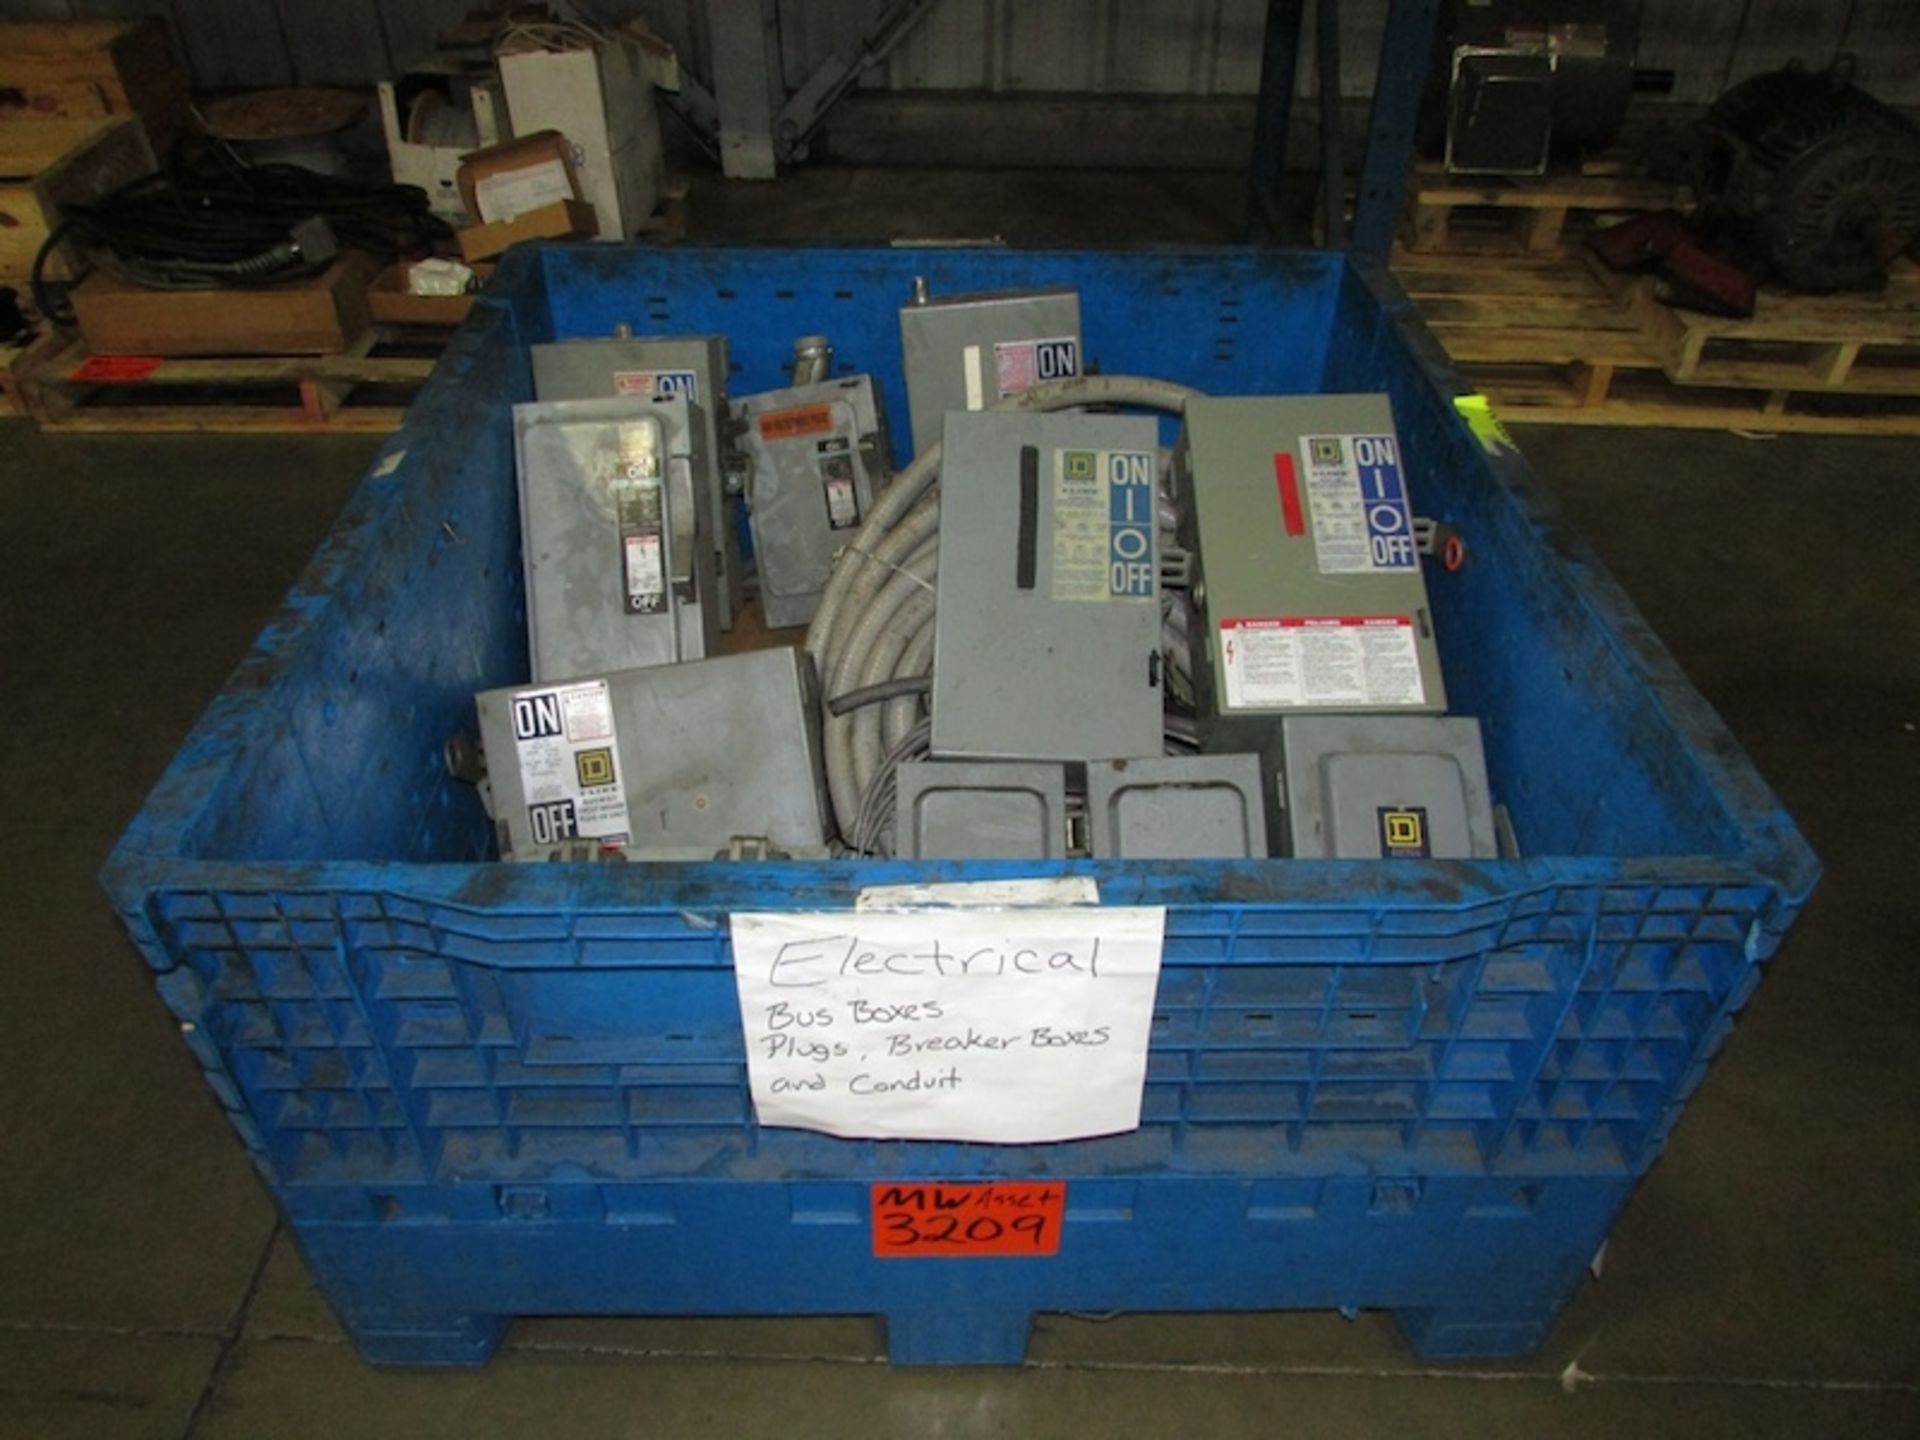 Plastic Bin of Assorted Electrical Components and Parts